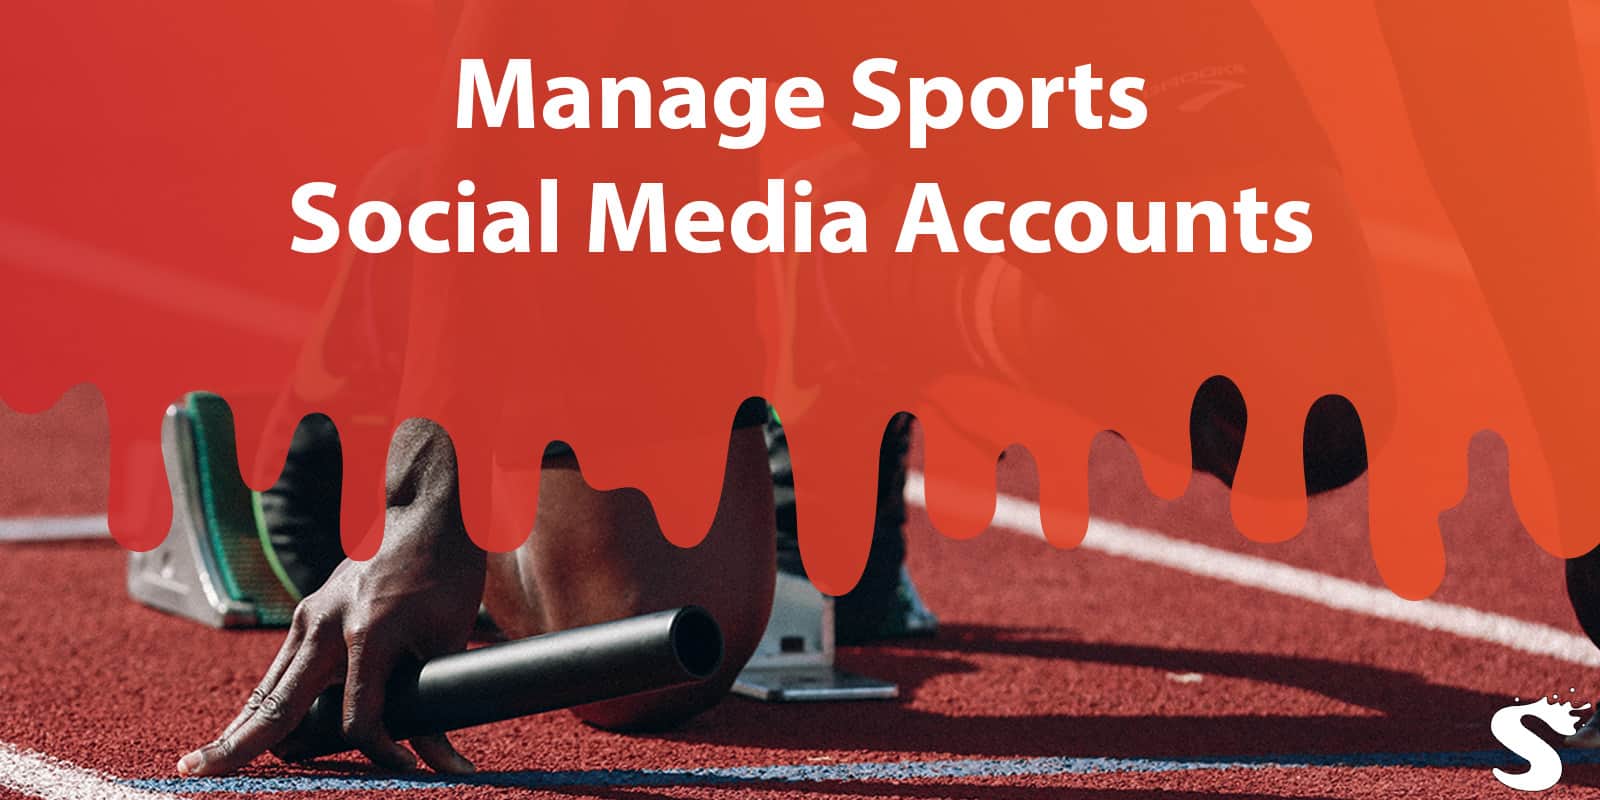 6 Tips to Manage Your Sports Social Media Account